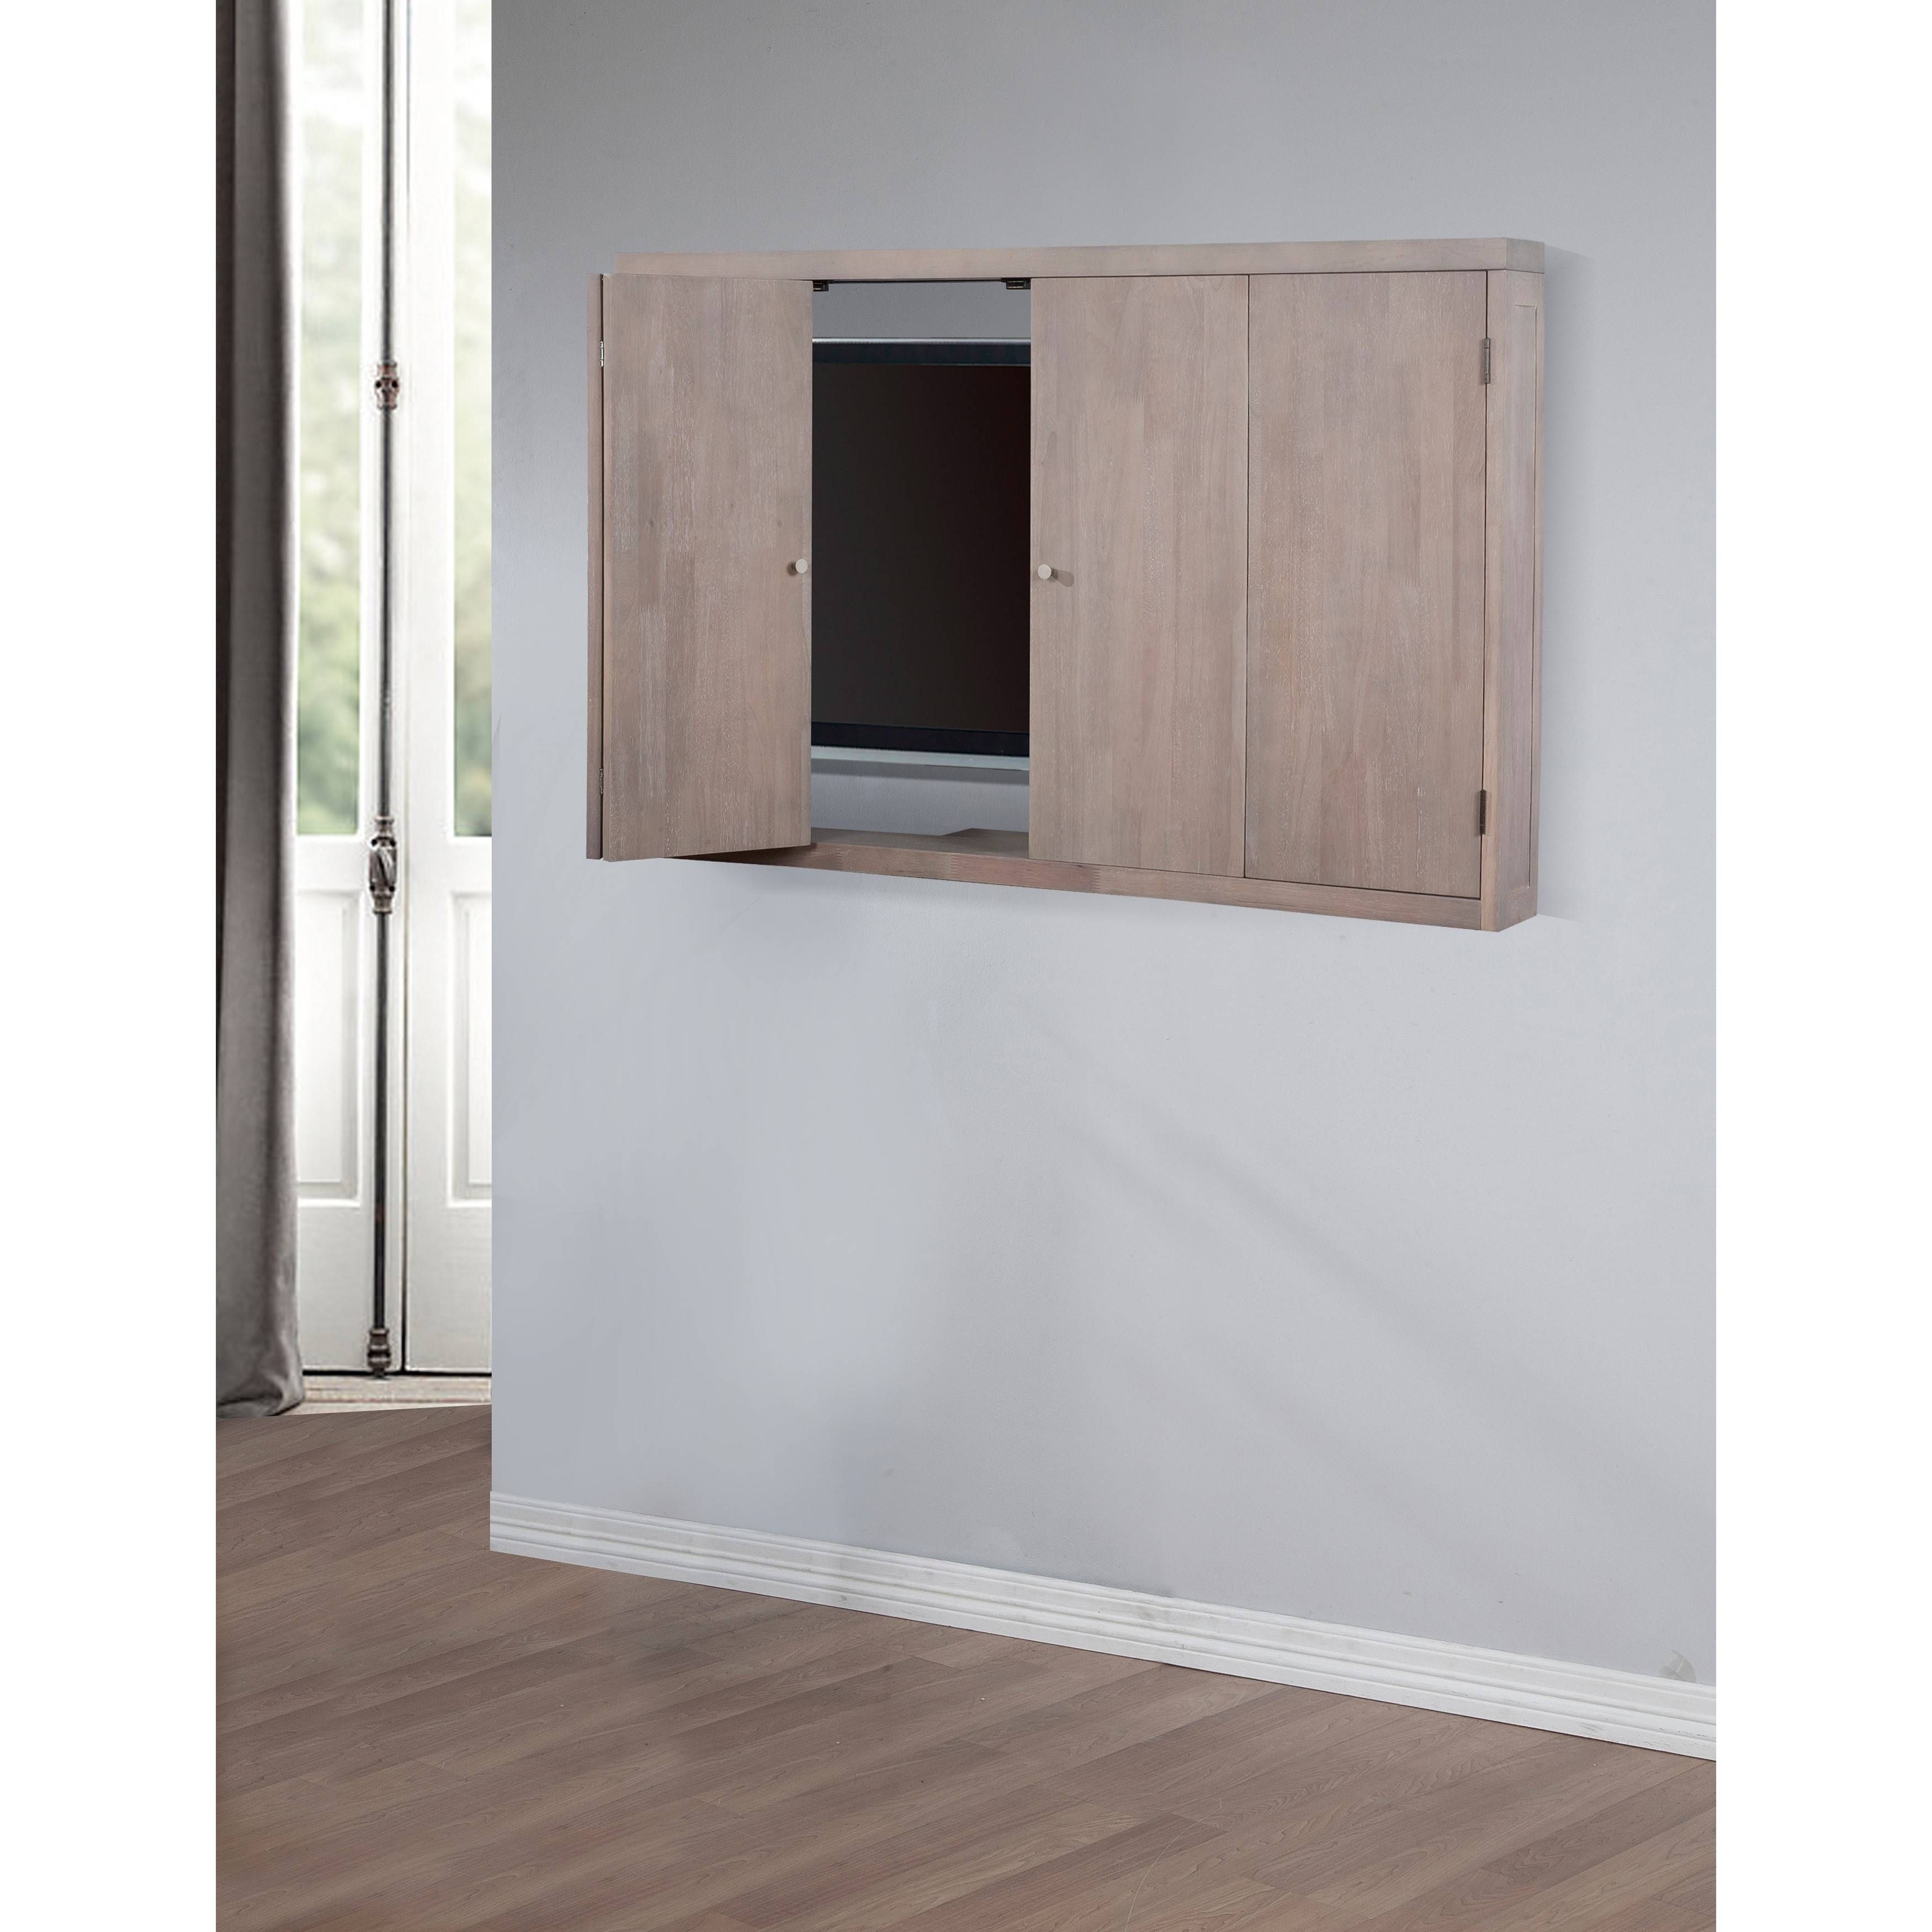 Small Wall Mounted Enclosed Tv Cabinets For Flat Screens With In Enclosed Tv Cabinets For Flat Screens With Doors (View 7 of 15)